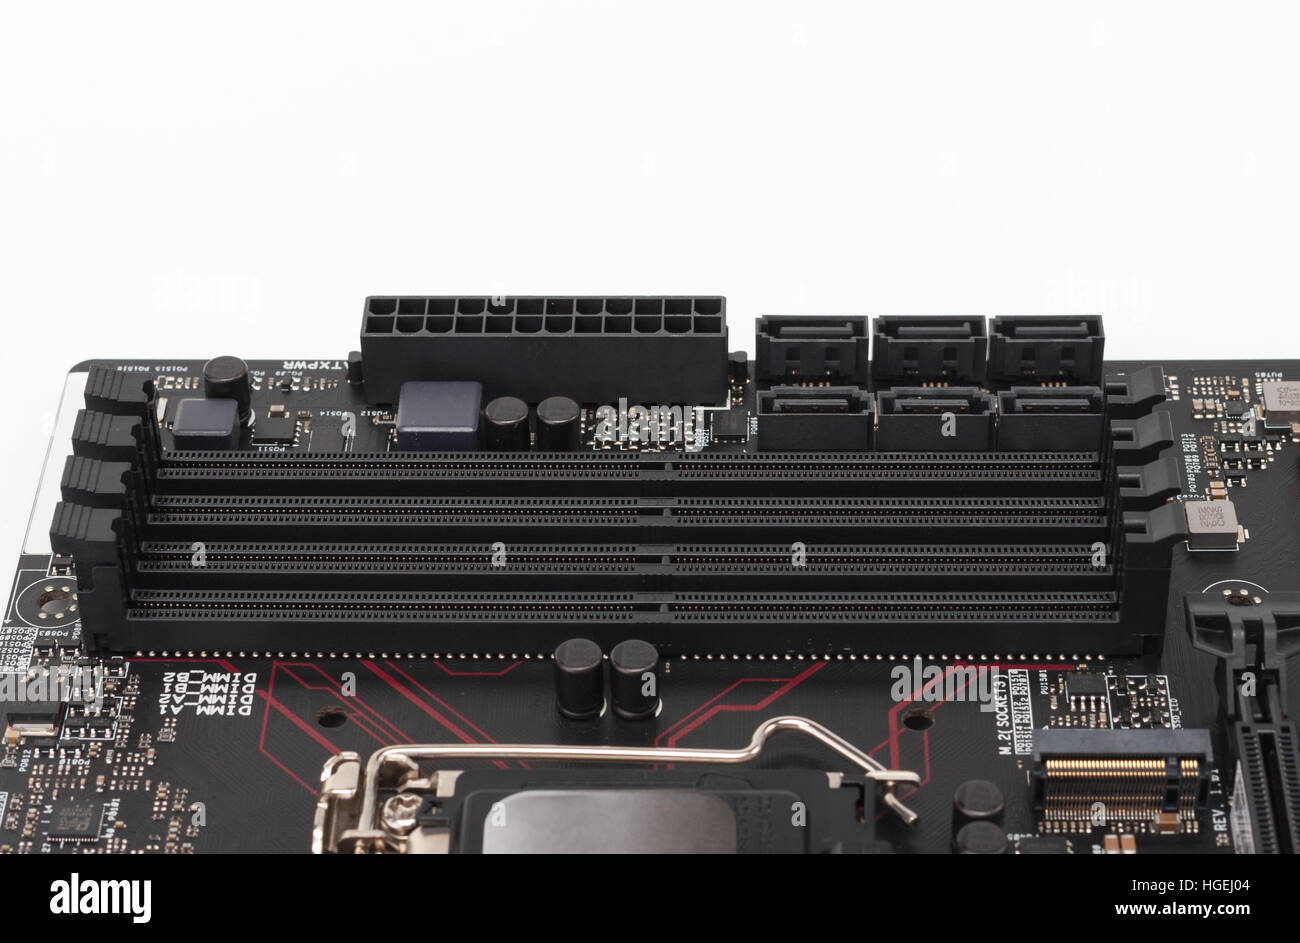 Slots for DDR4 memory in gaming motherboard, isolated on white background Stock Photo